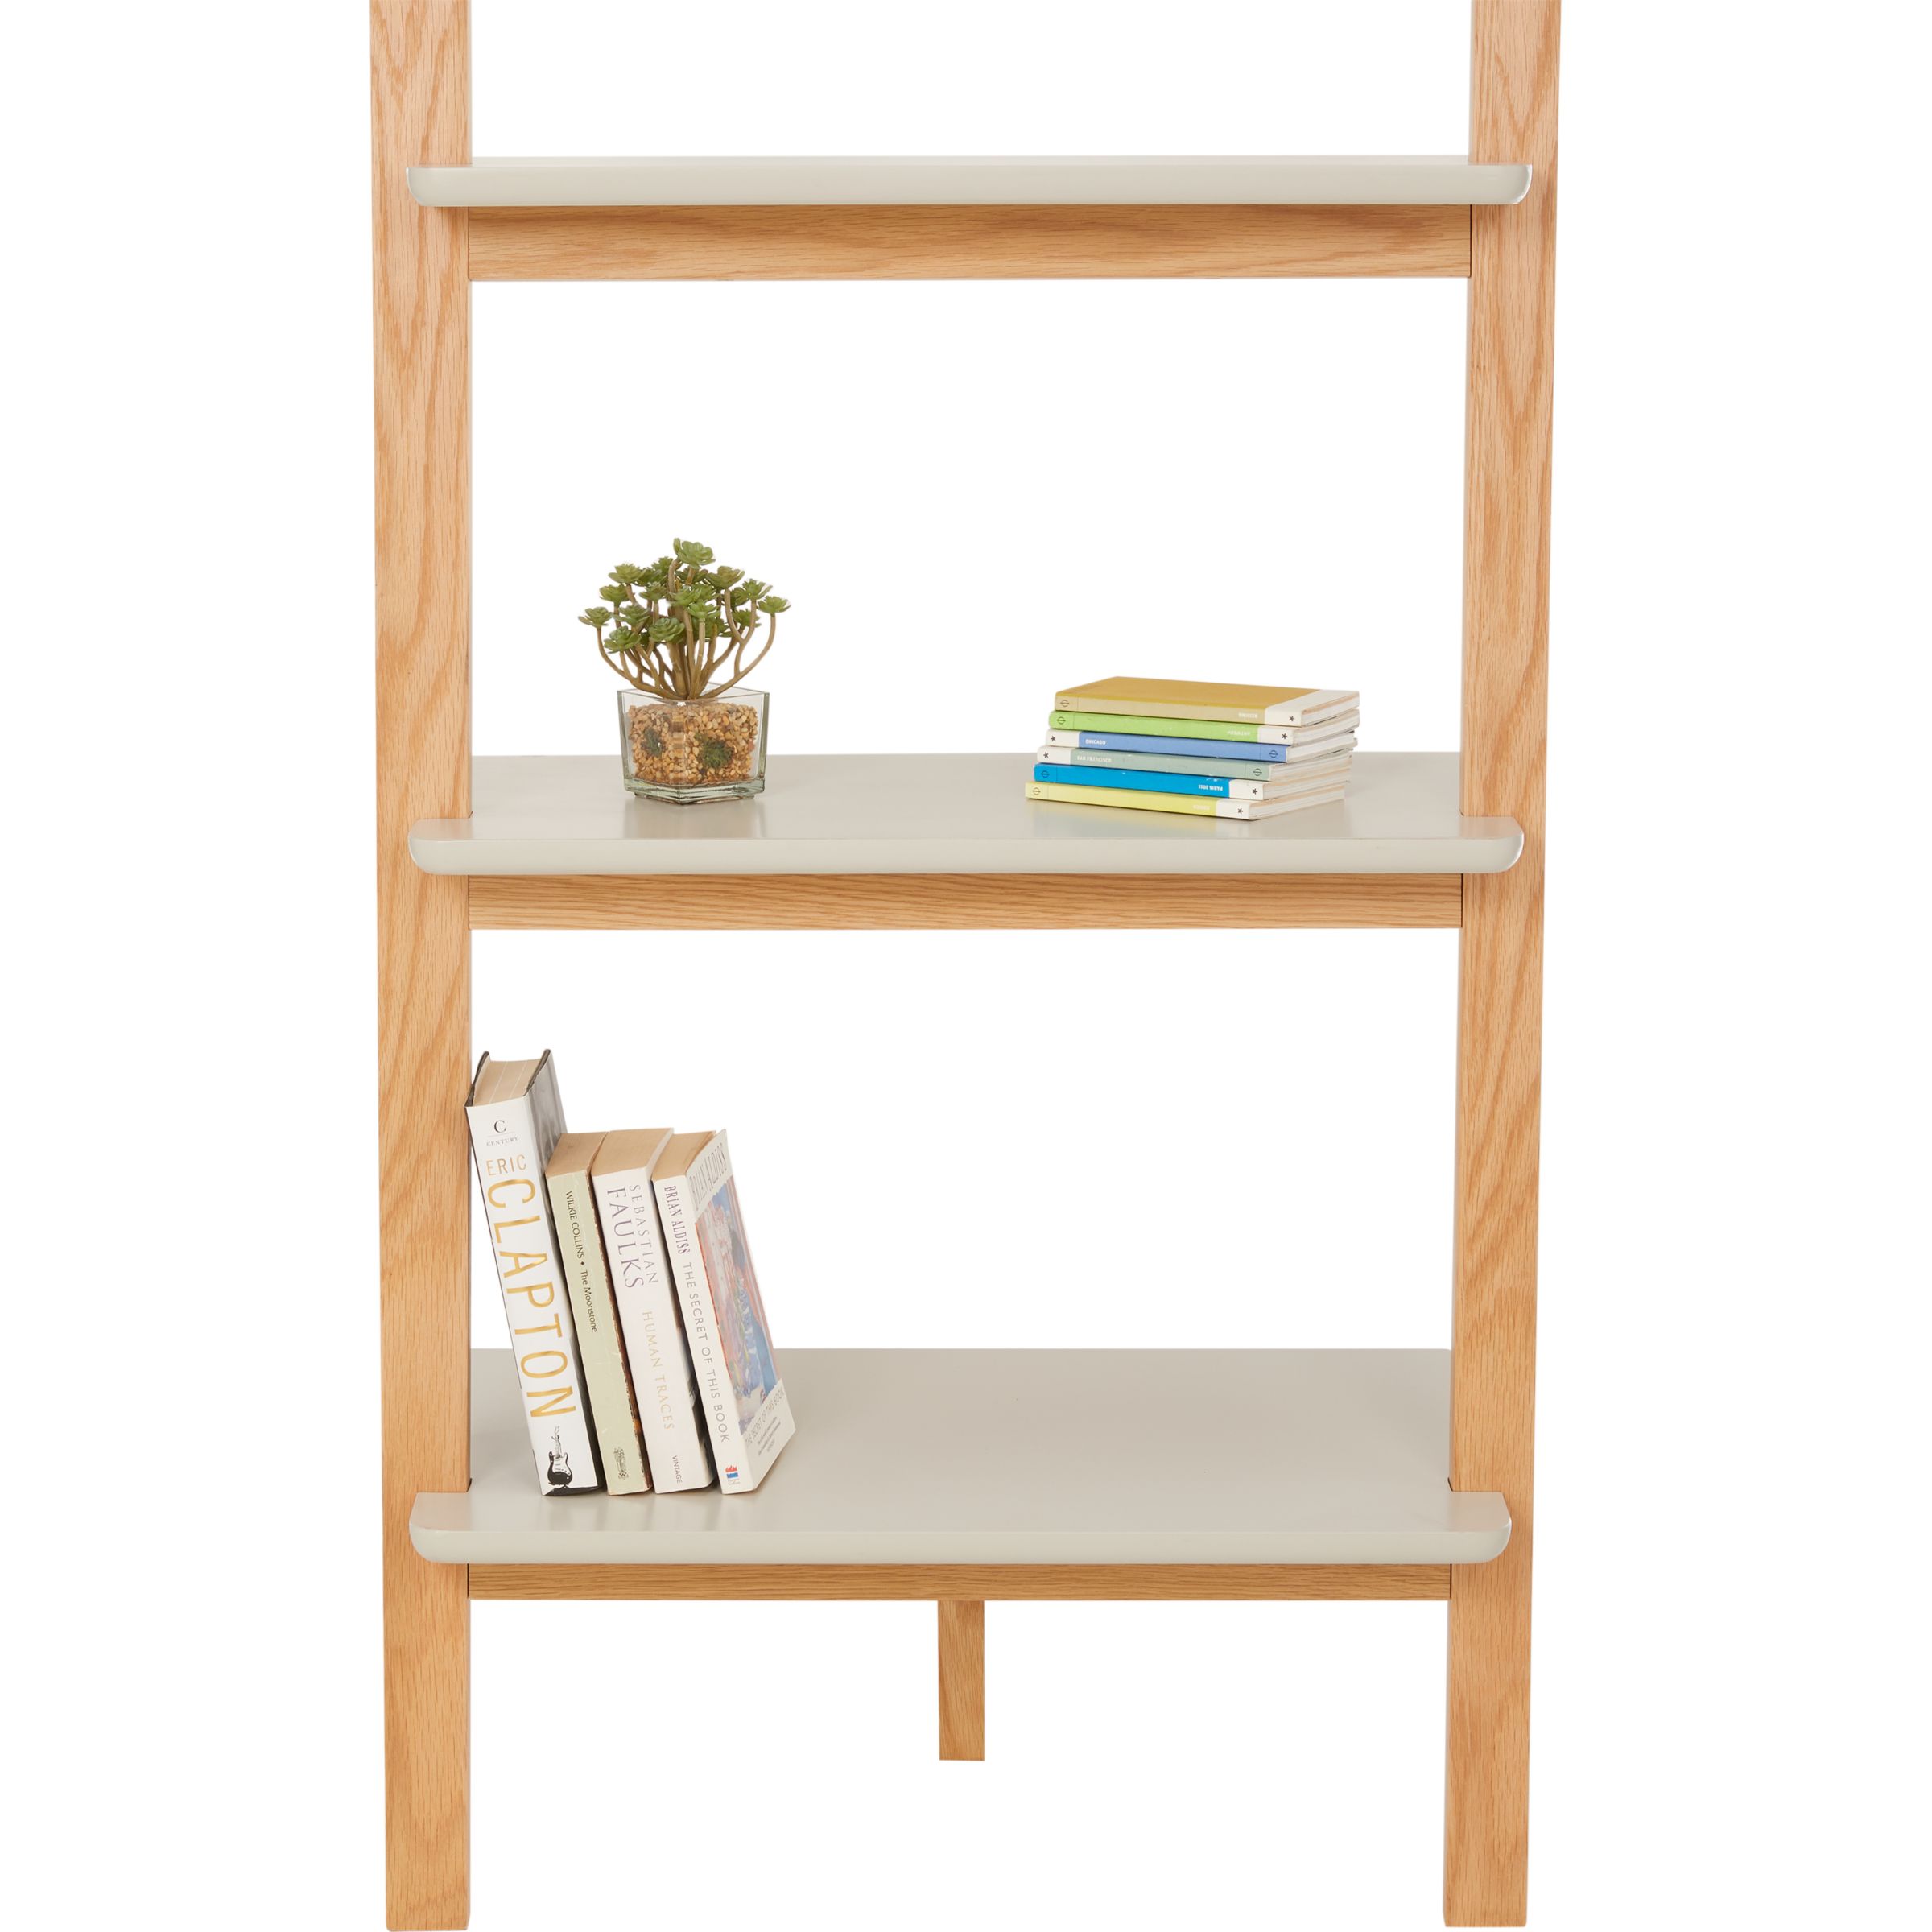 House By John Lewis Anton 5 Shelf Wood Wide Leaning Bookcase At